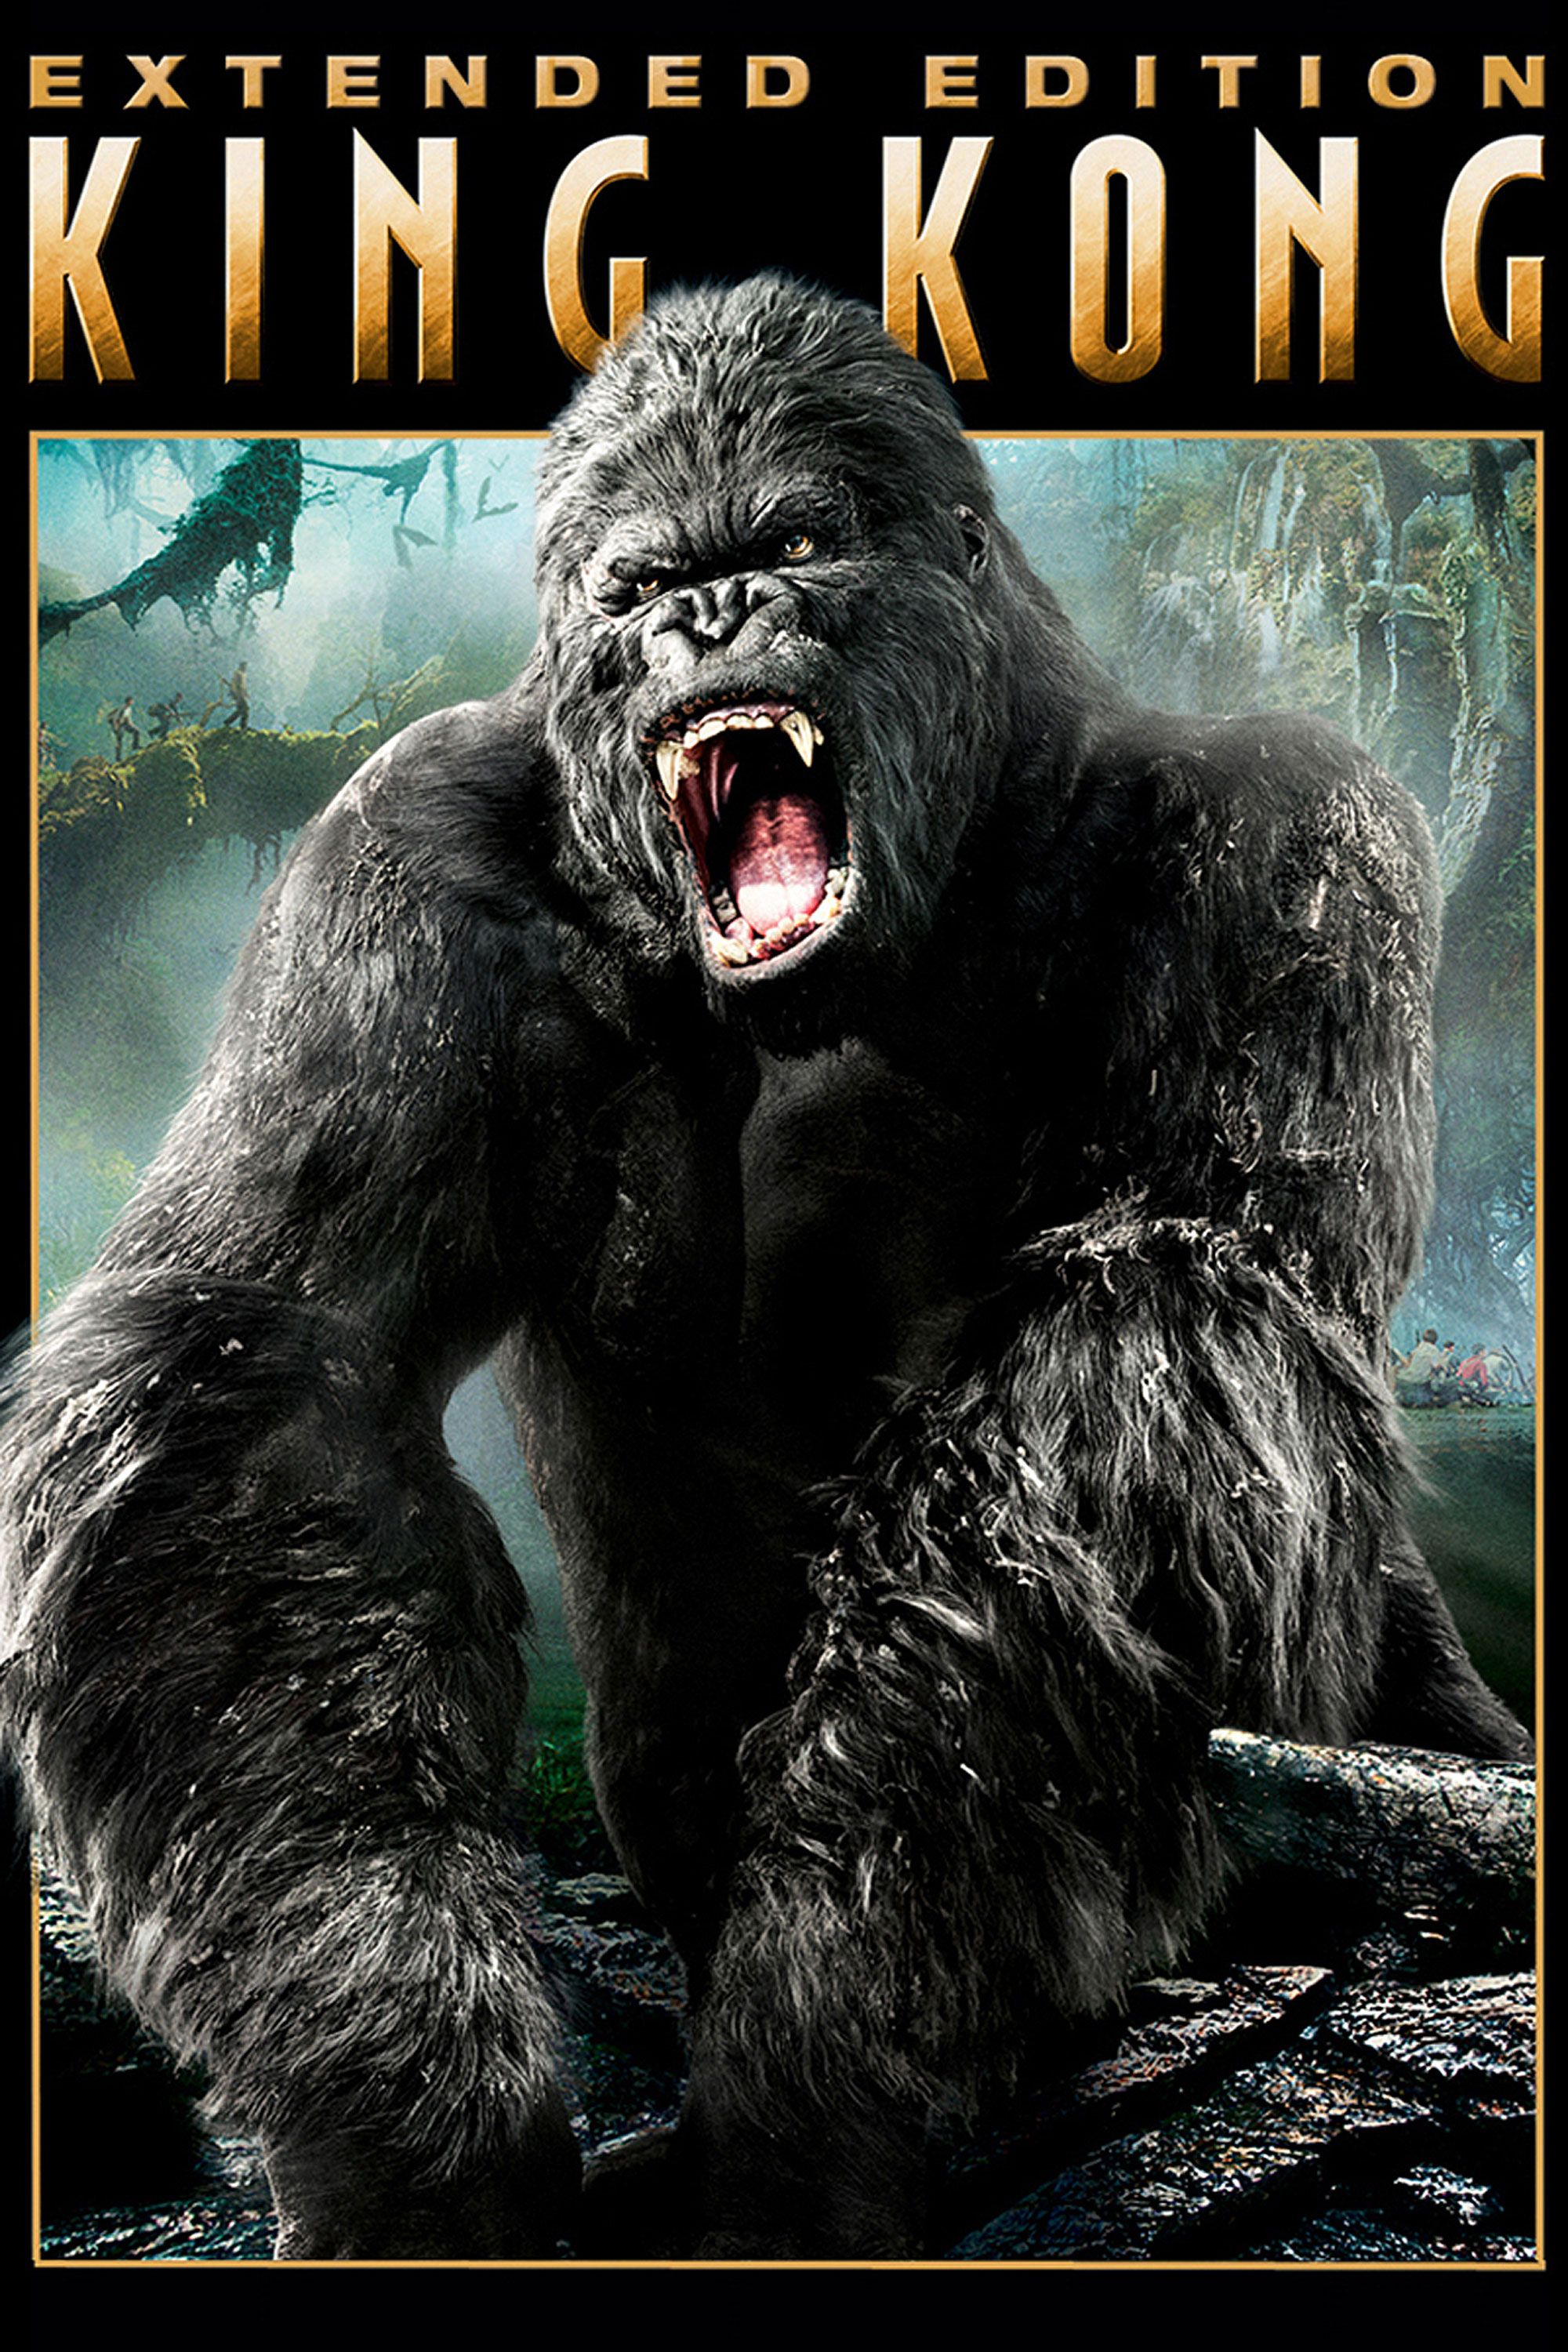 King Kong (2005)  Where to watch streaming and online in New